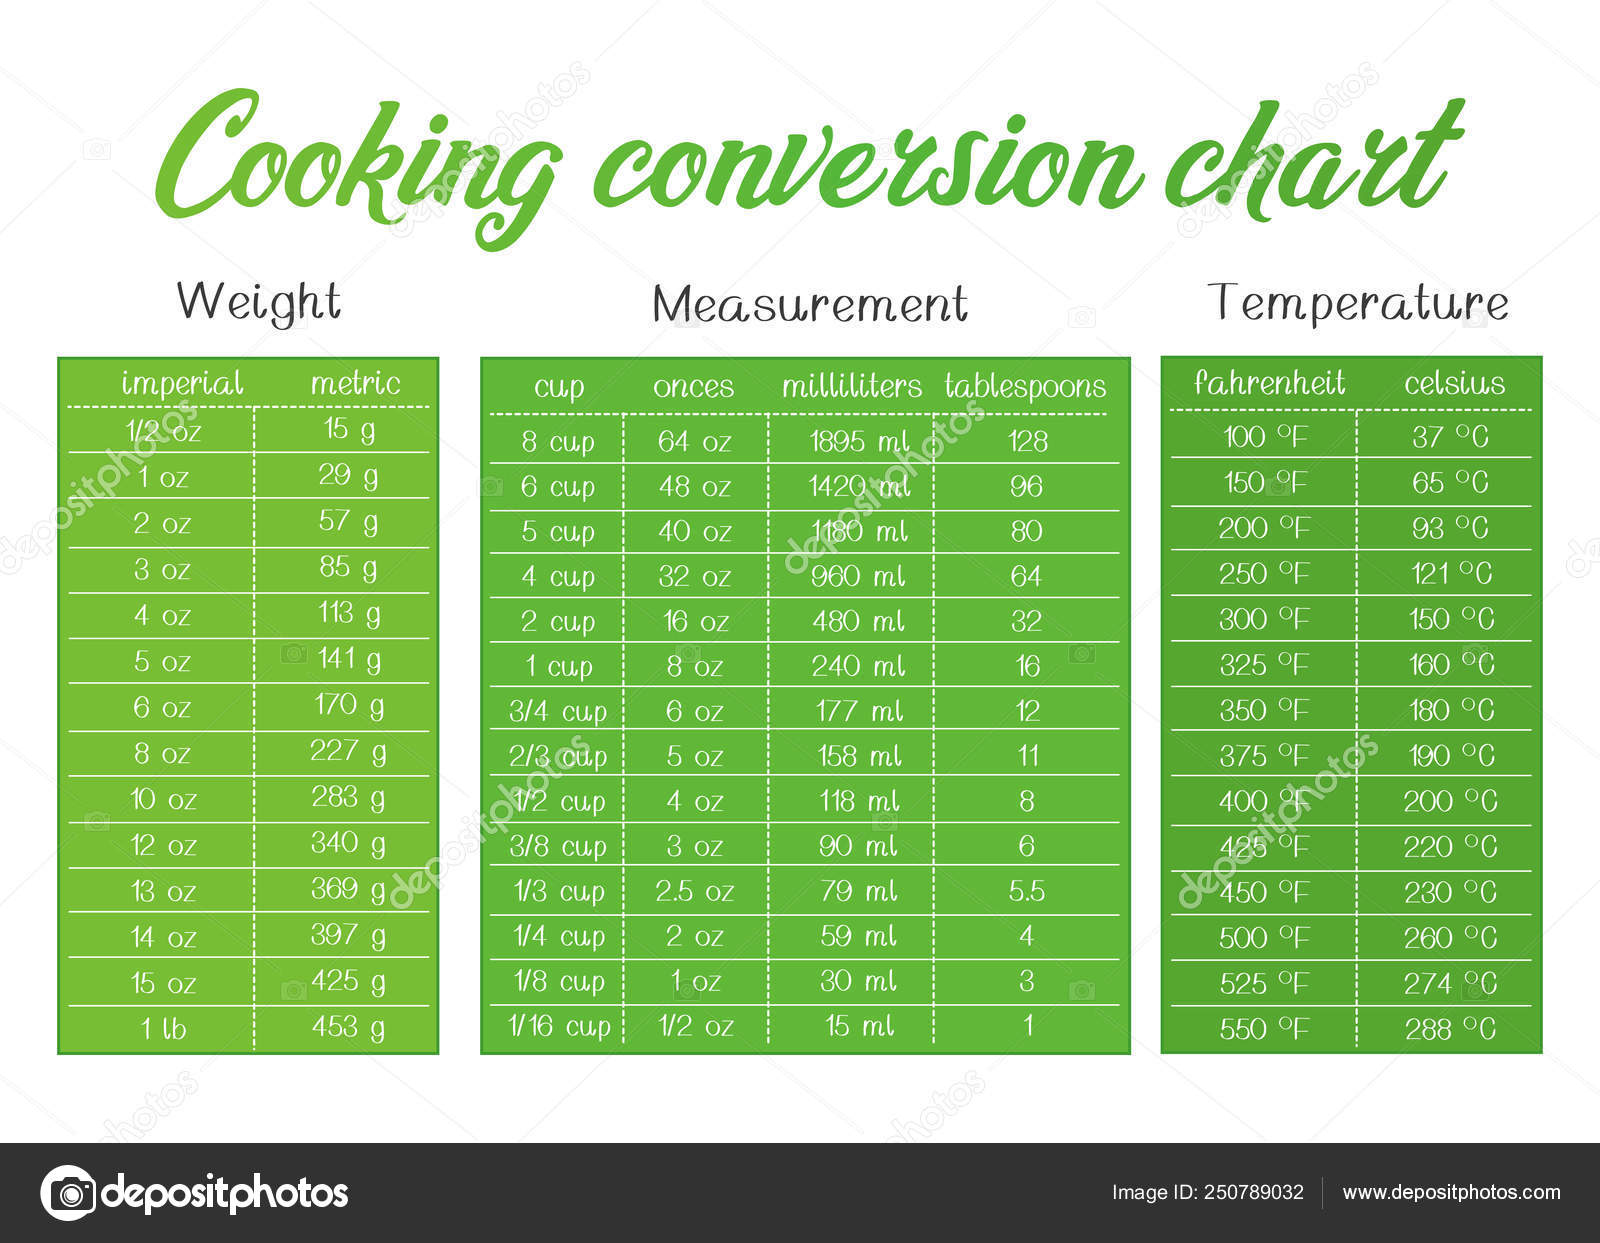 Celsius To Fahrenheit Conversion Table For Cooking | All About Image HD What Is 325 Fahrenheit In Celsius